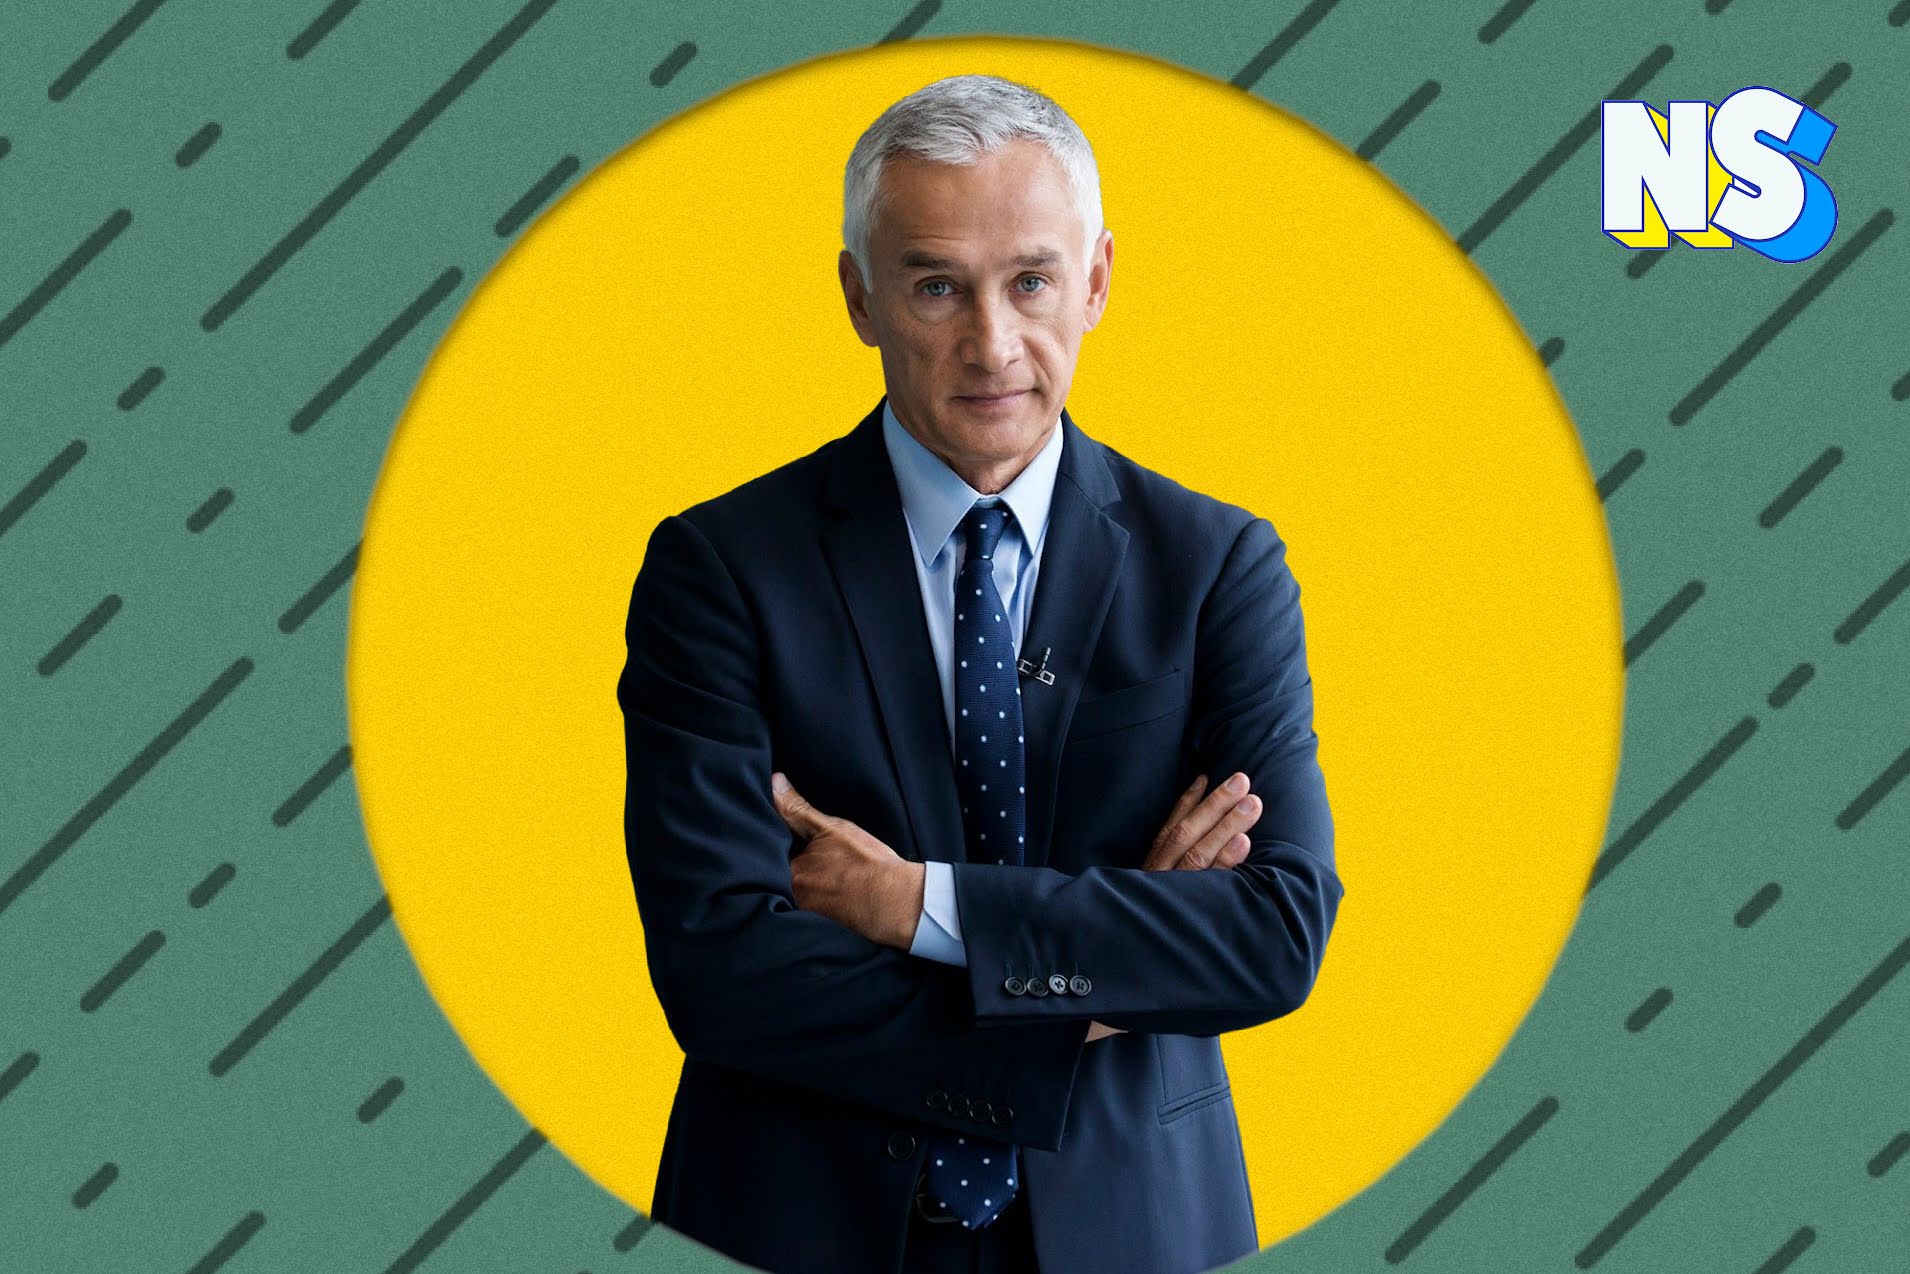 Latino Reporter Jorge Ramos Became a Household Name After Solidifying Himself as a Man of Integrity nuestro stories